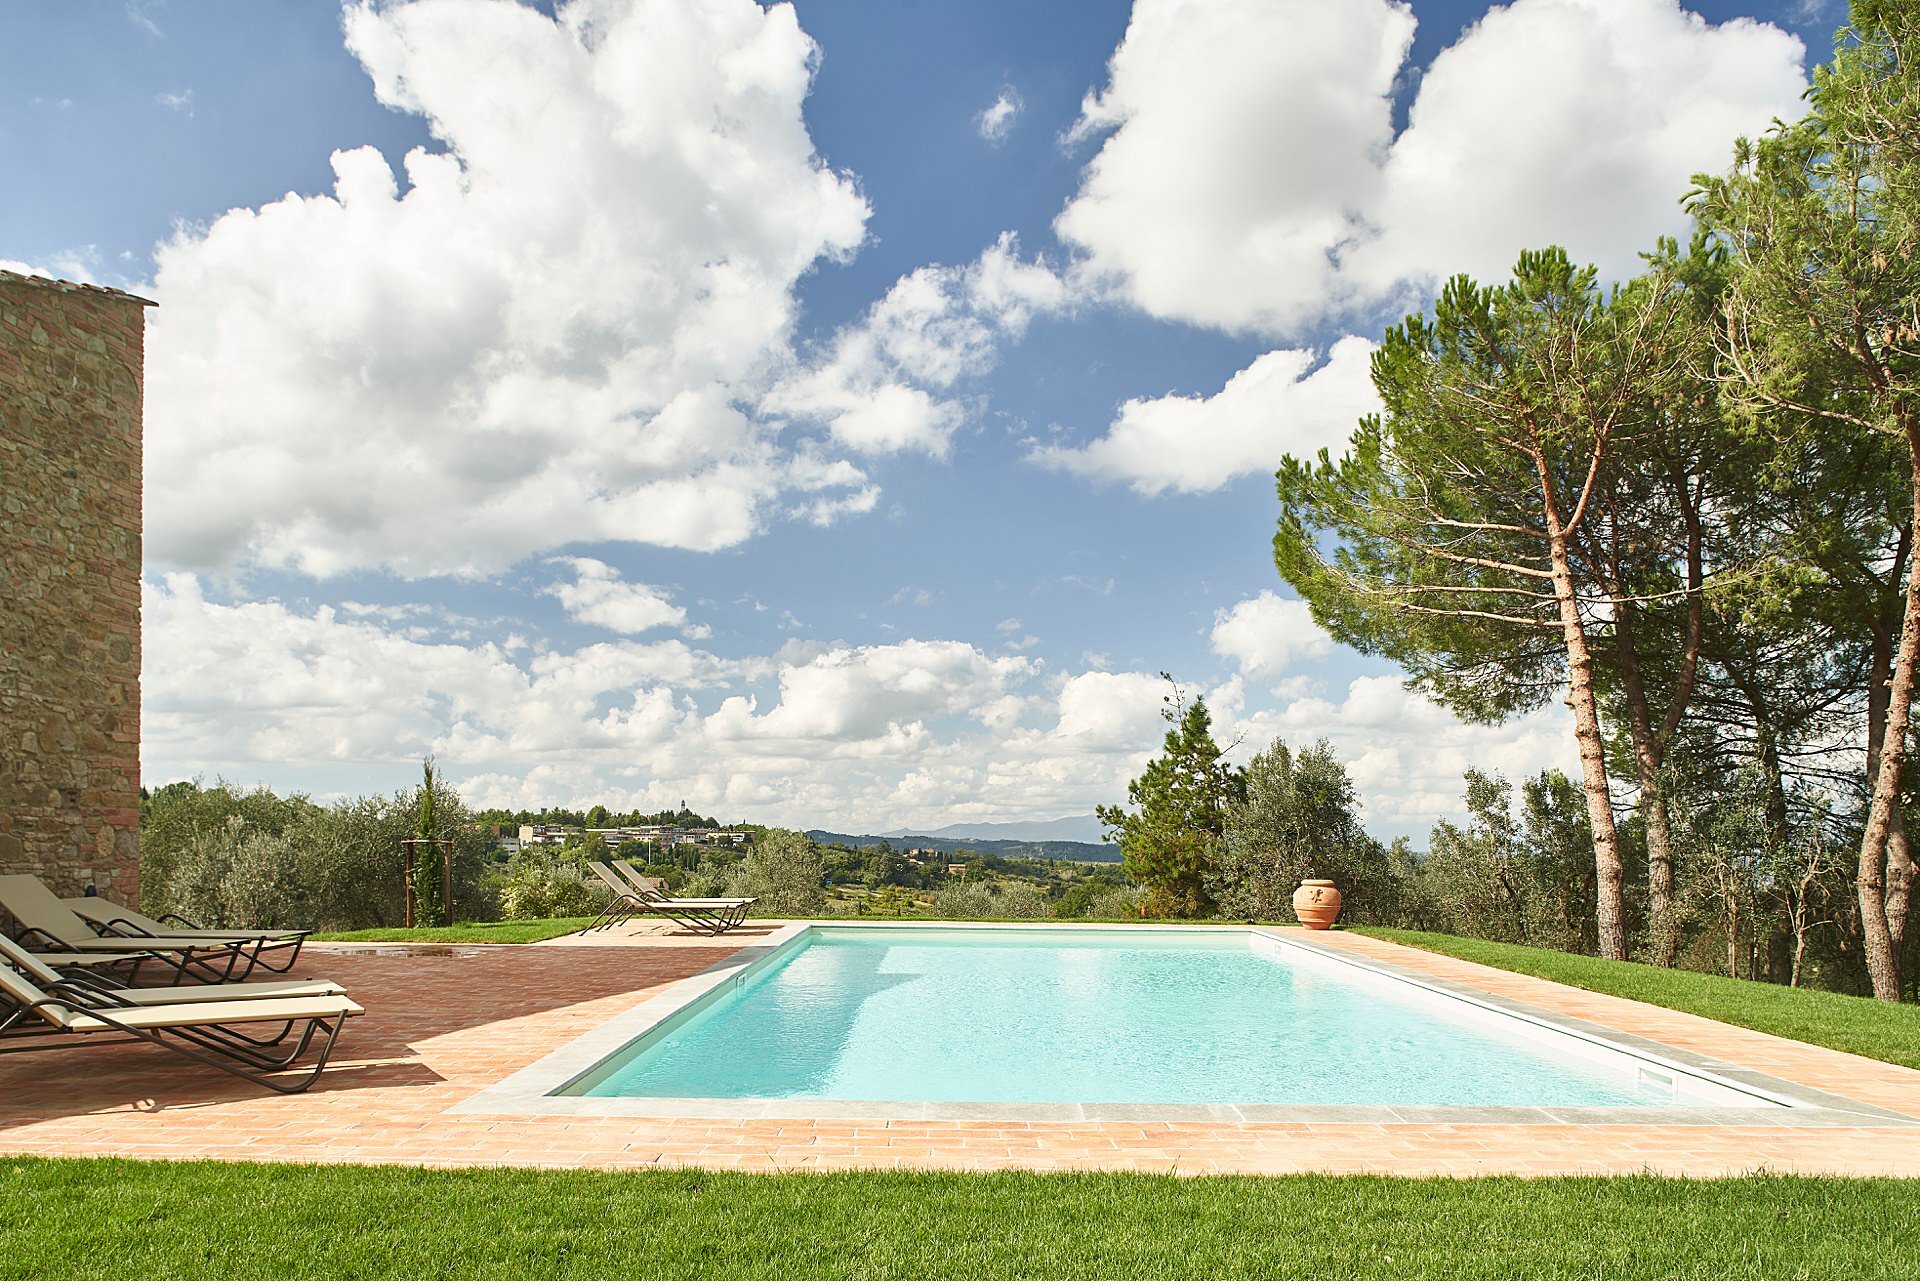  Beautiful newly restored villa in Tuscany between florence, pisa and siena, in Montaione. The property was obtained from an old wine production farm. It overlooks the Tuscan hills of Chianti with an infinity pool. Numerous rooms and spacious living 